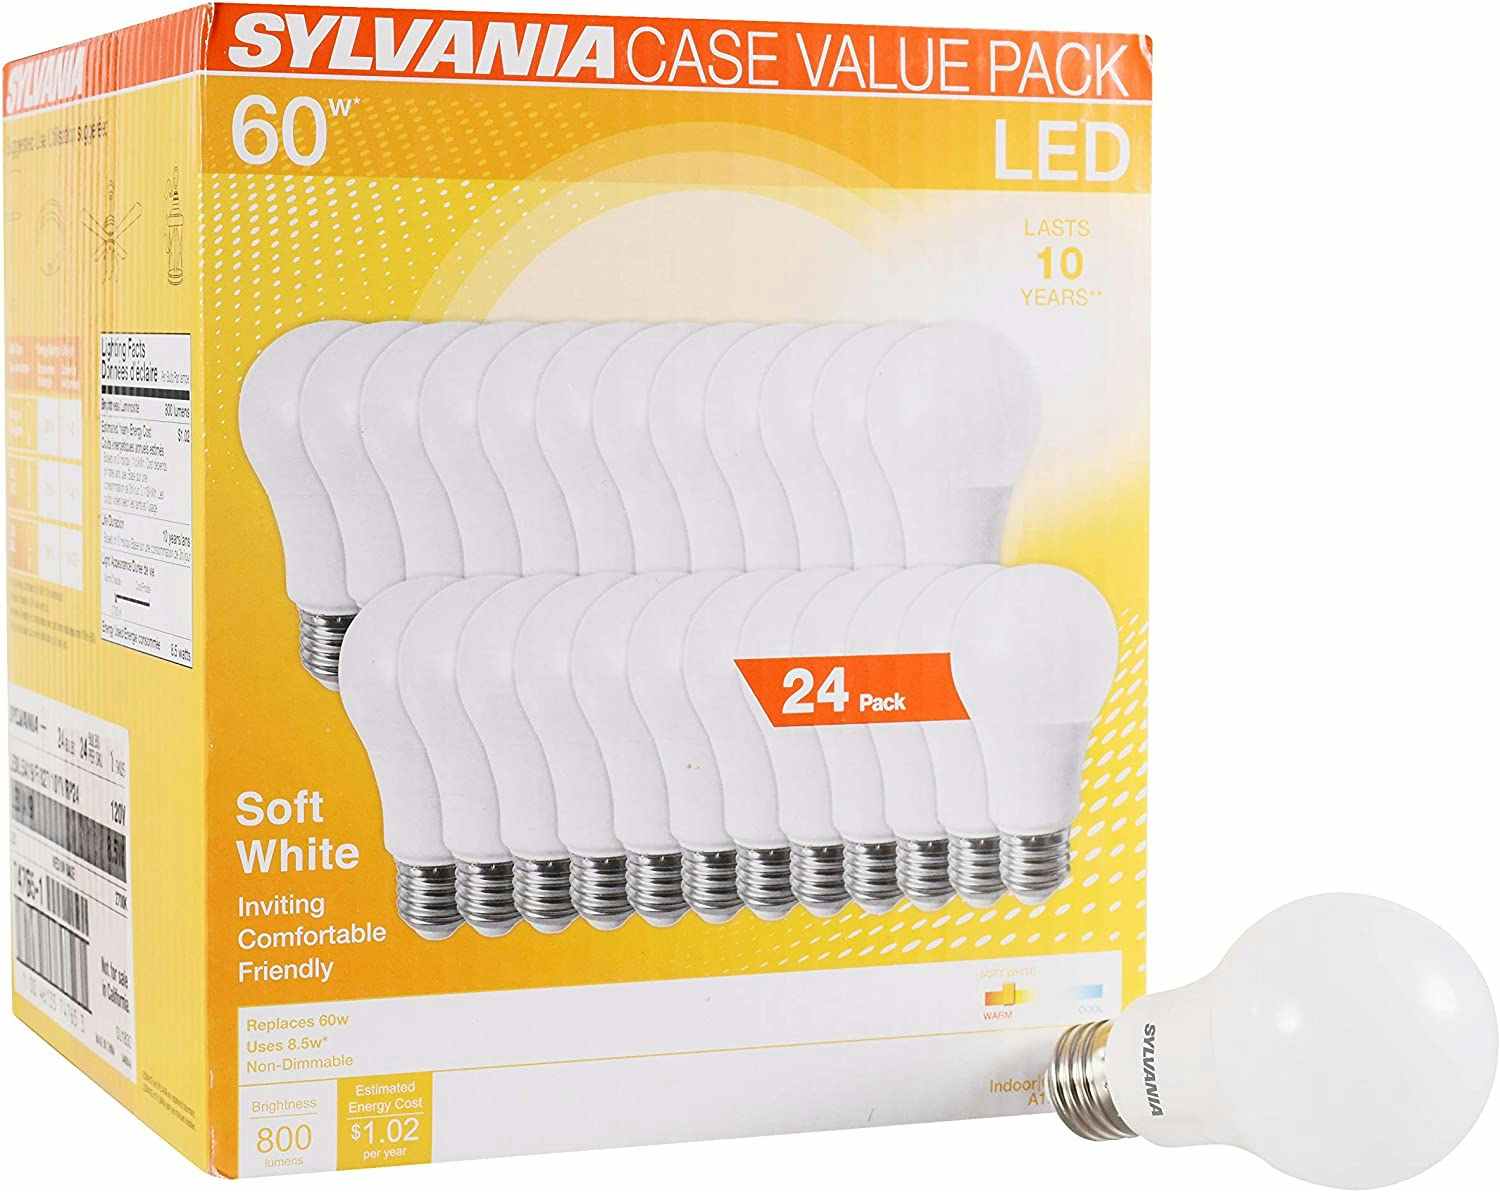 A box of 24 Sylvania light bulbs, with one light bulb placed in front of the box